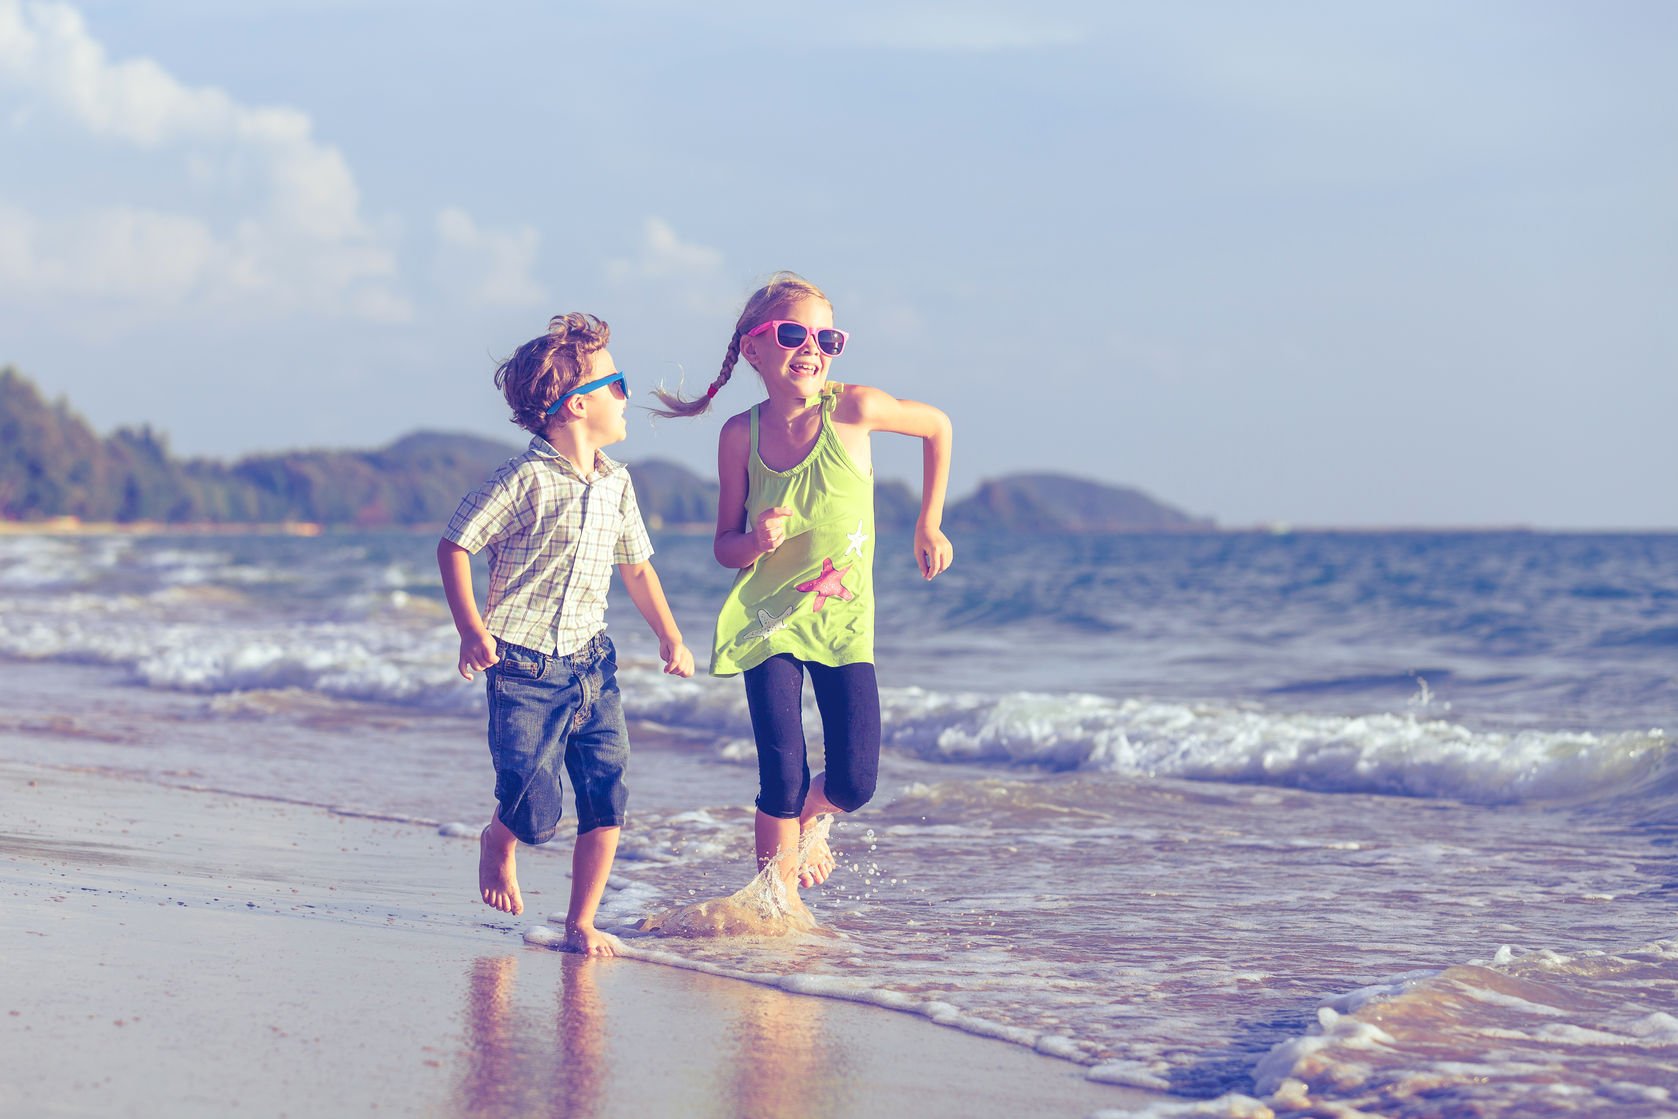 An image of children laughing and playing on a beach.